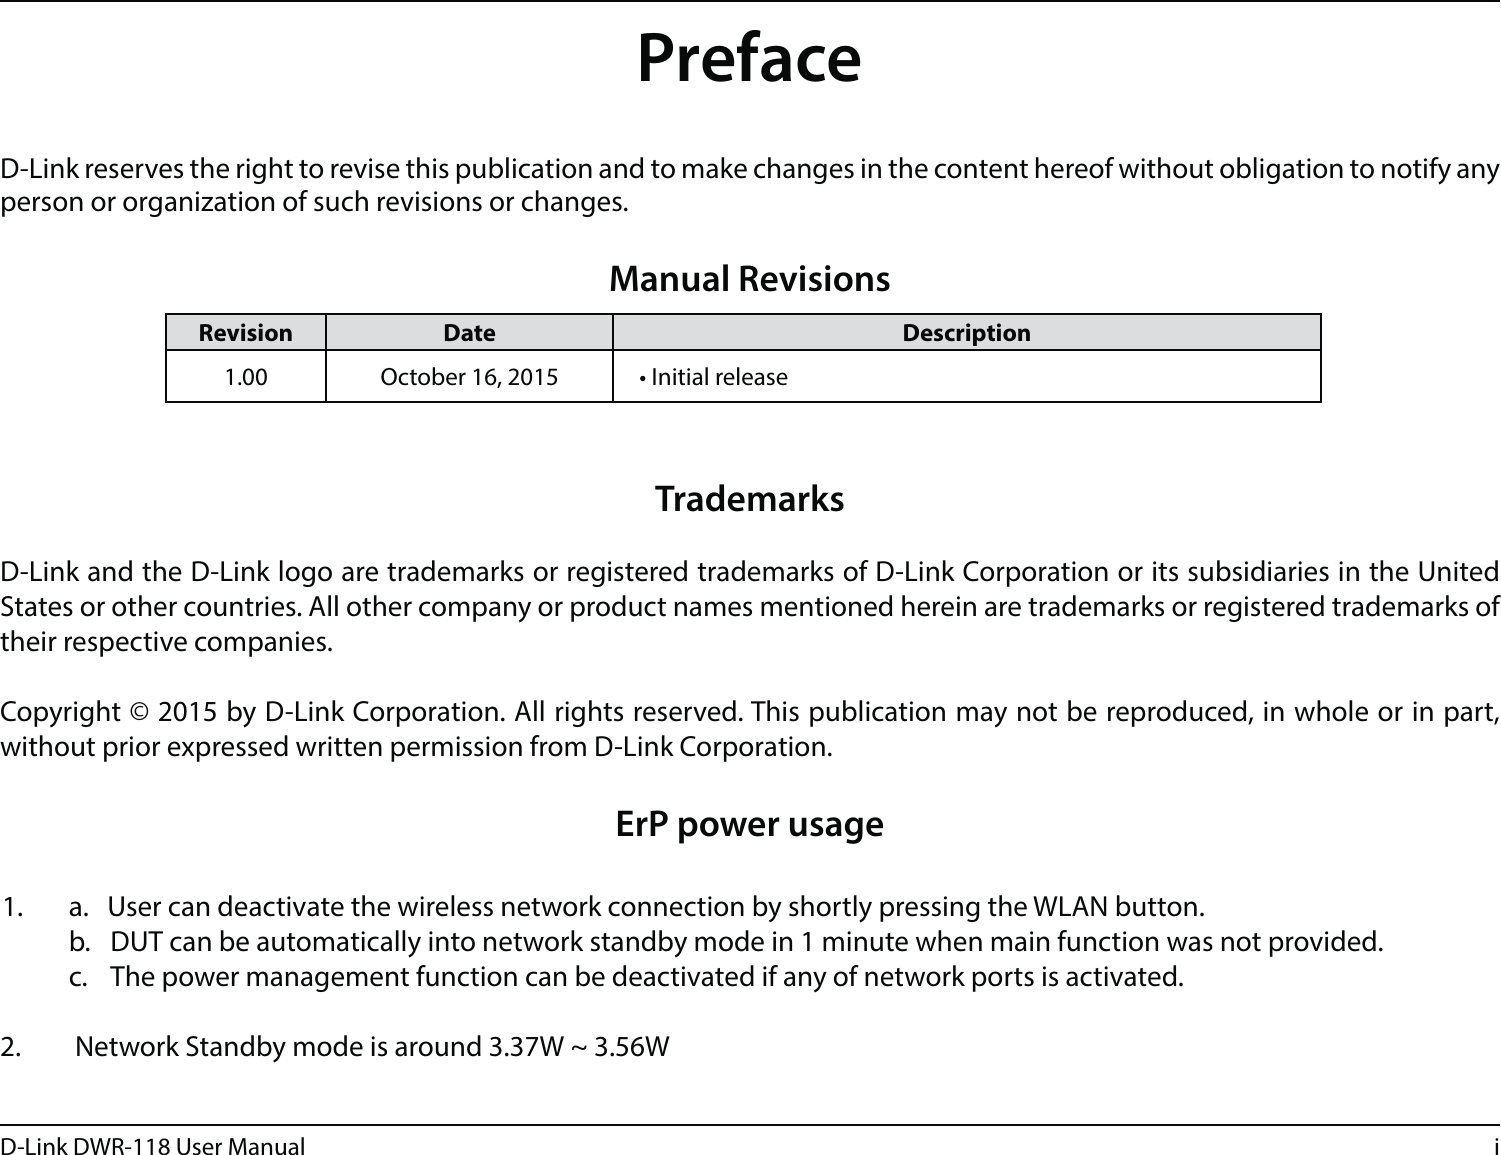 iD-Link DWR-118 User ManualD-Link reserves the right to revise this publication and to make changes in the content hereof without obligation to notify any person or organization of such revisions or changes.Manual RevisionsTrademarksD-Link and the D-Link logo are trademarks or registered trademarks of D-Link Corporation or its subsidiaries in the United States or other countries. All other company or product names mentioned herein are trademarks or registered trademarks of their respective companies.Copyright © 2015 by D-Link Corporation. All rights reserved. This publication may not be reproduced, in whole or in part, without prior expressed written permission from D-Link Corporation.ErP power usage  1.  a.   User can deactivate the wireless network connection by shortly pressing the WLAN button.   b.  DUT can be automatically into network standby mode in 1 minute when main function was not provided.    c.  The power management function can be deactivated if any of network ports is activated. 2.  Network Standby mode is around 3.37W ~ 3.56W  Revision Date Description1.00 October 16, 2015 t*OJUJBMSFMFBTFPreface